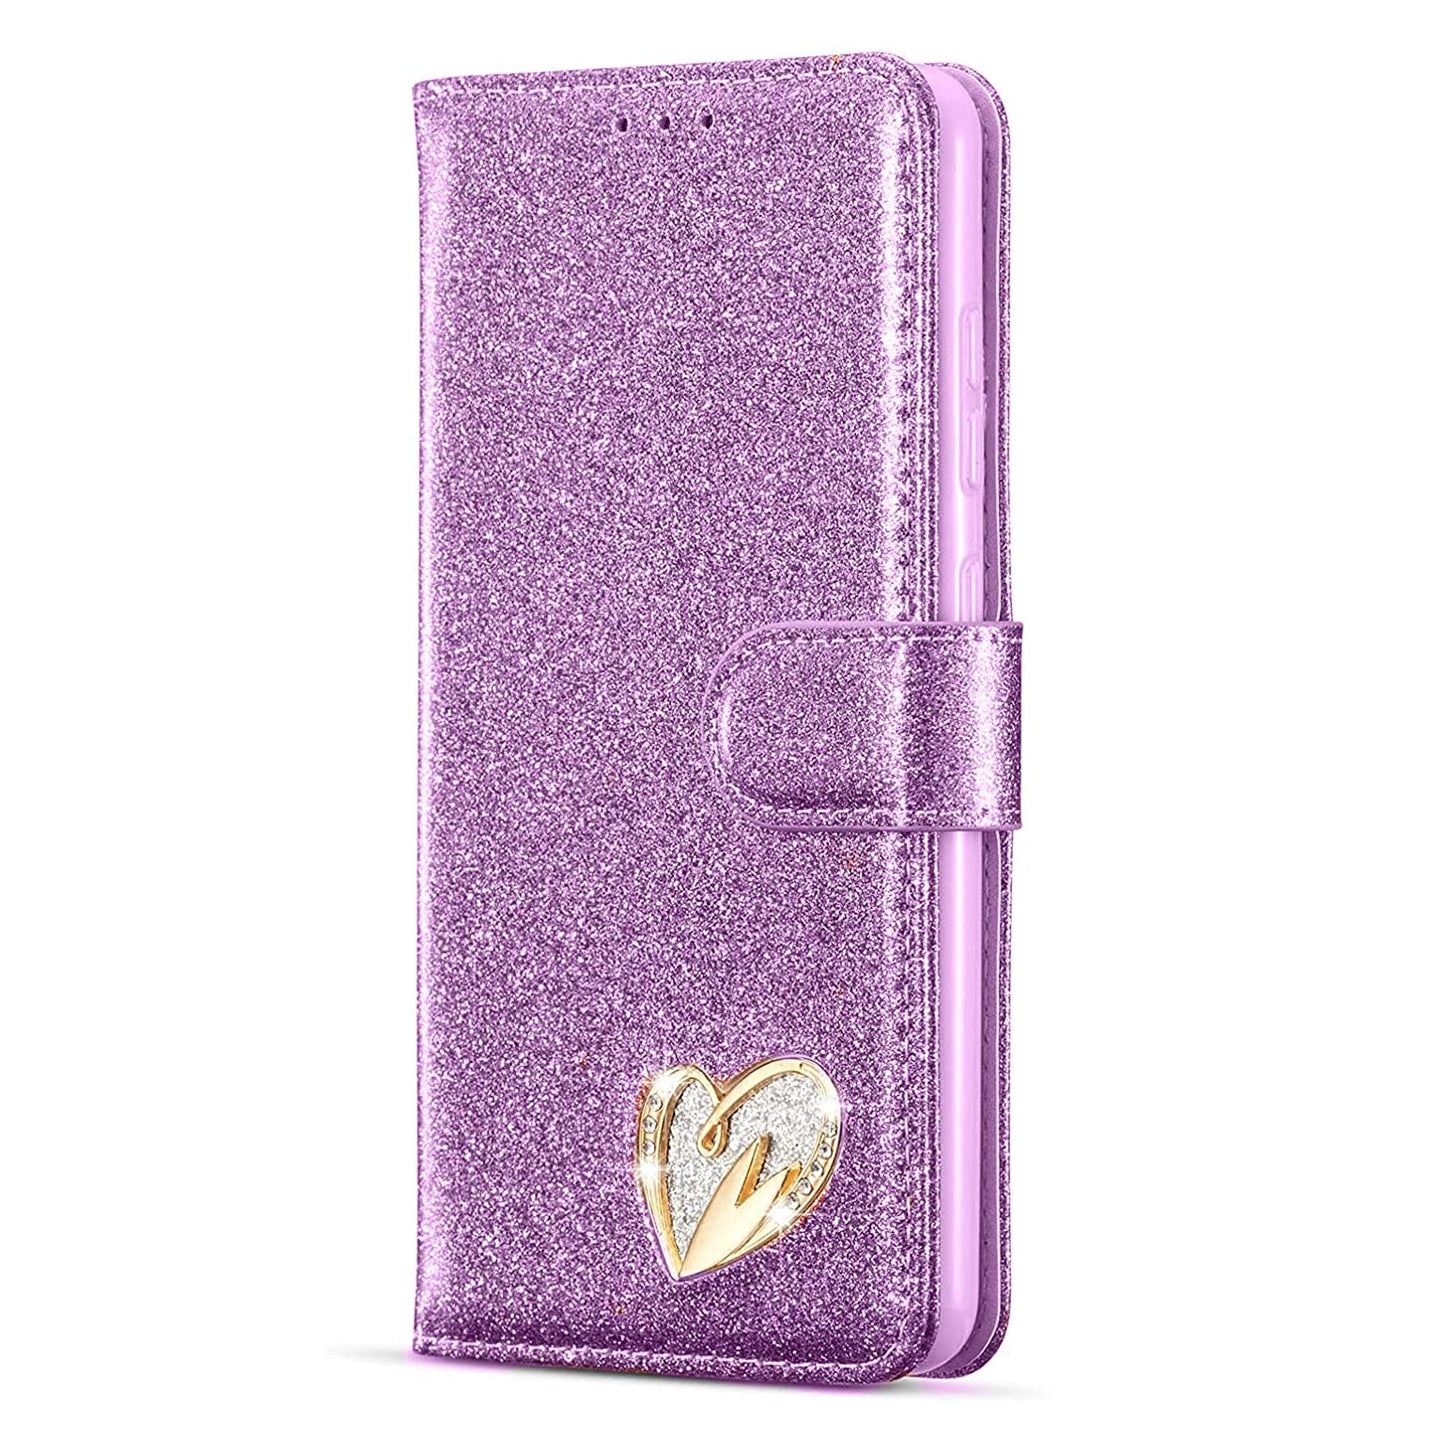 Shiny Leather Glitter Wallet Flip Case with Card Slots for iPhone